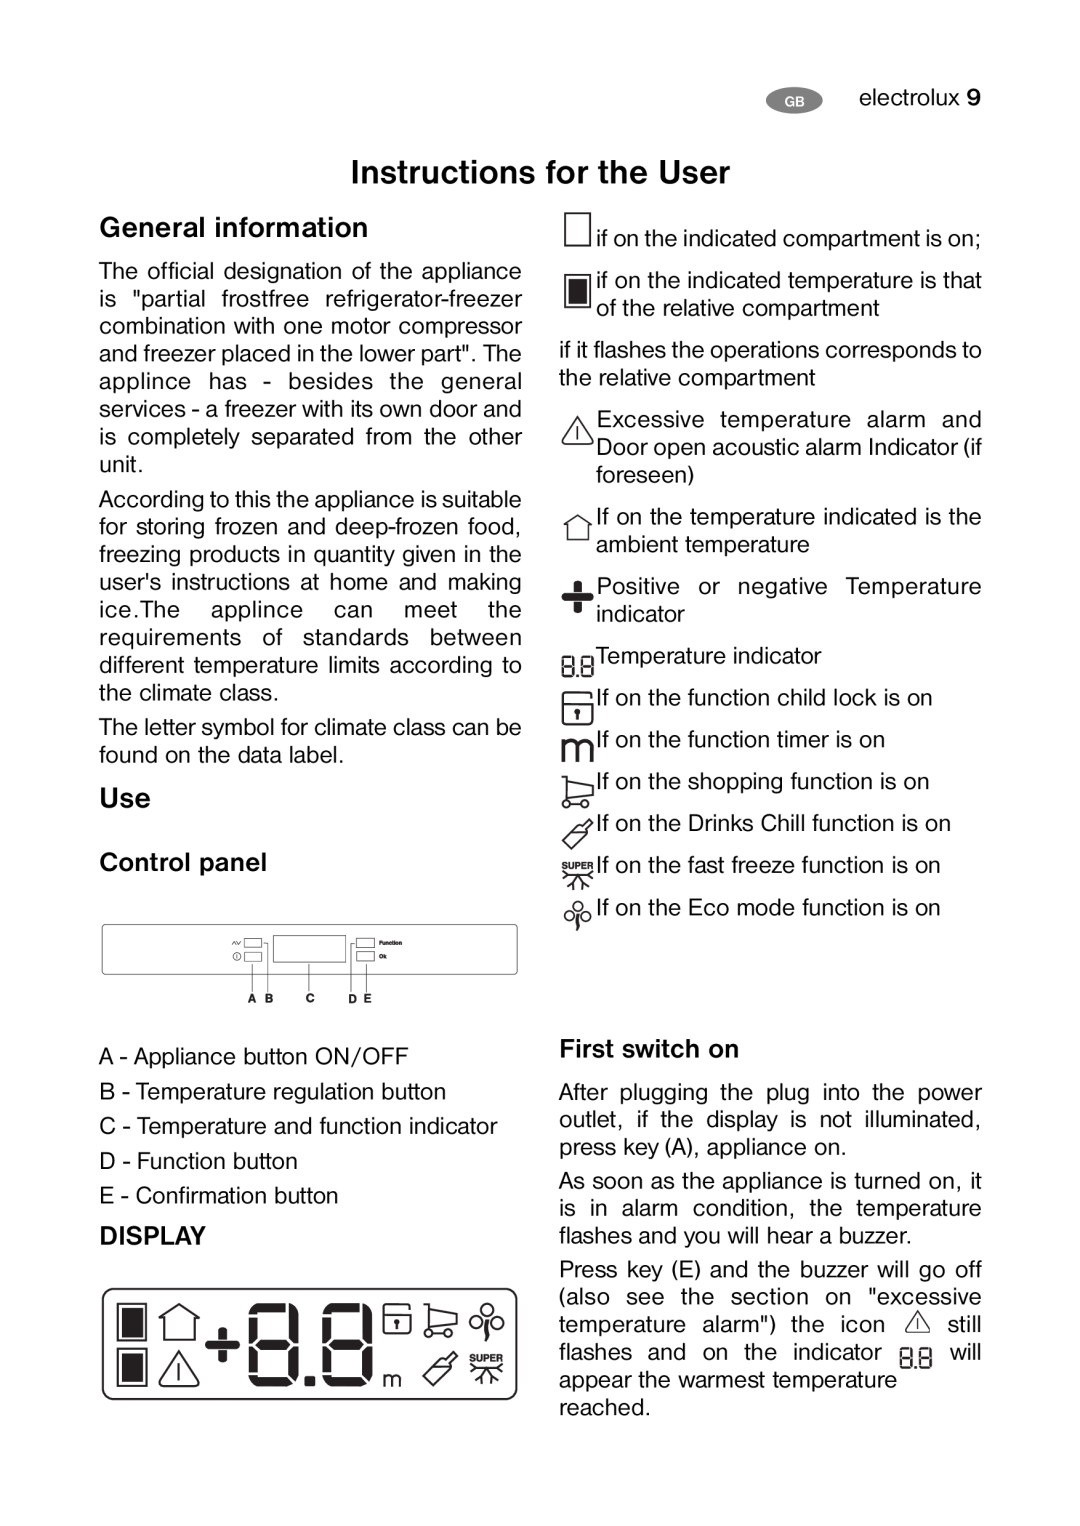 Electrolux ENB 40200 W user manual Instructions for the User, General information, Control panel, Display, First switch on 